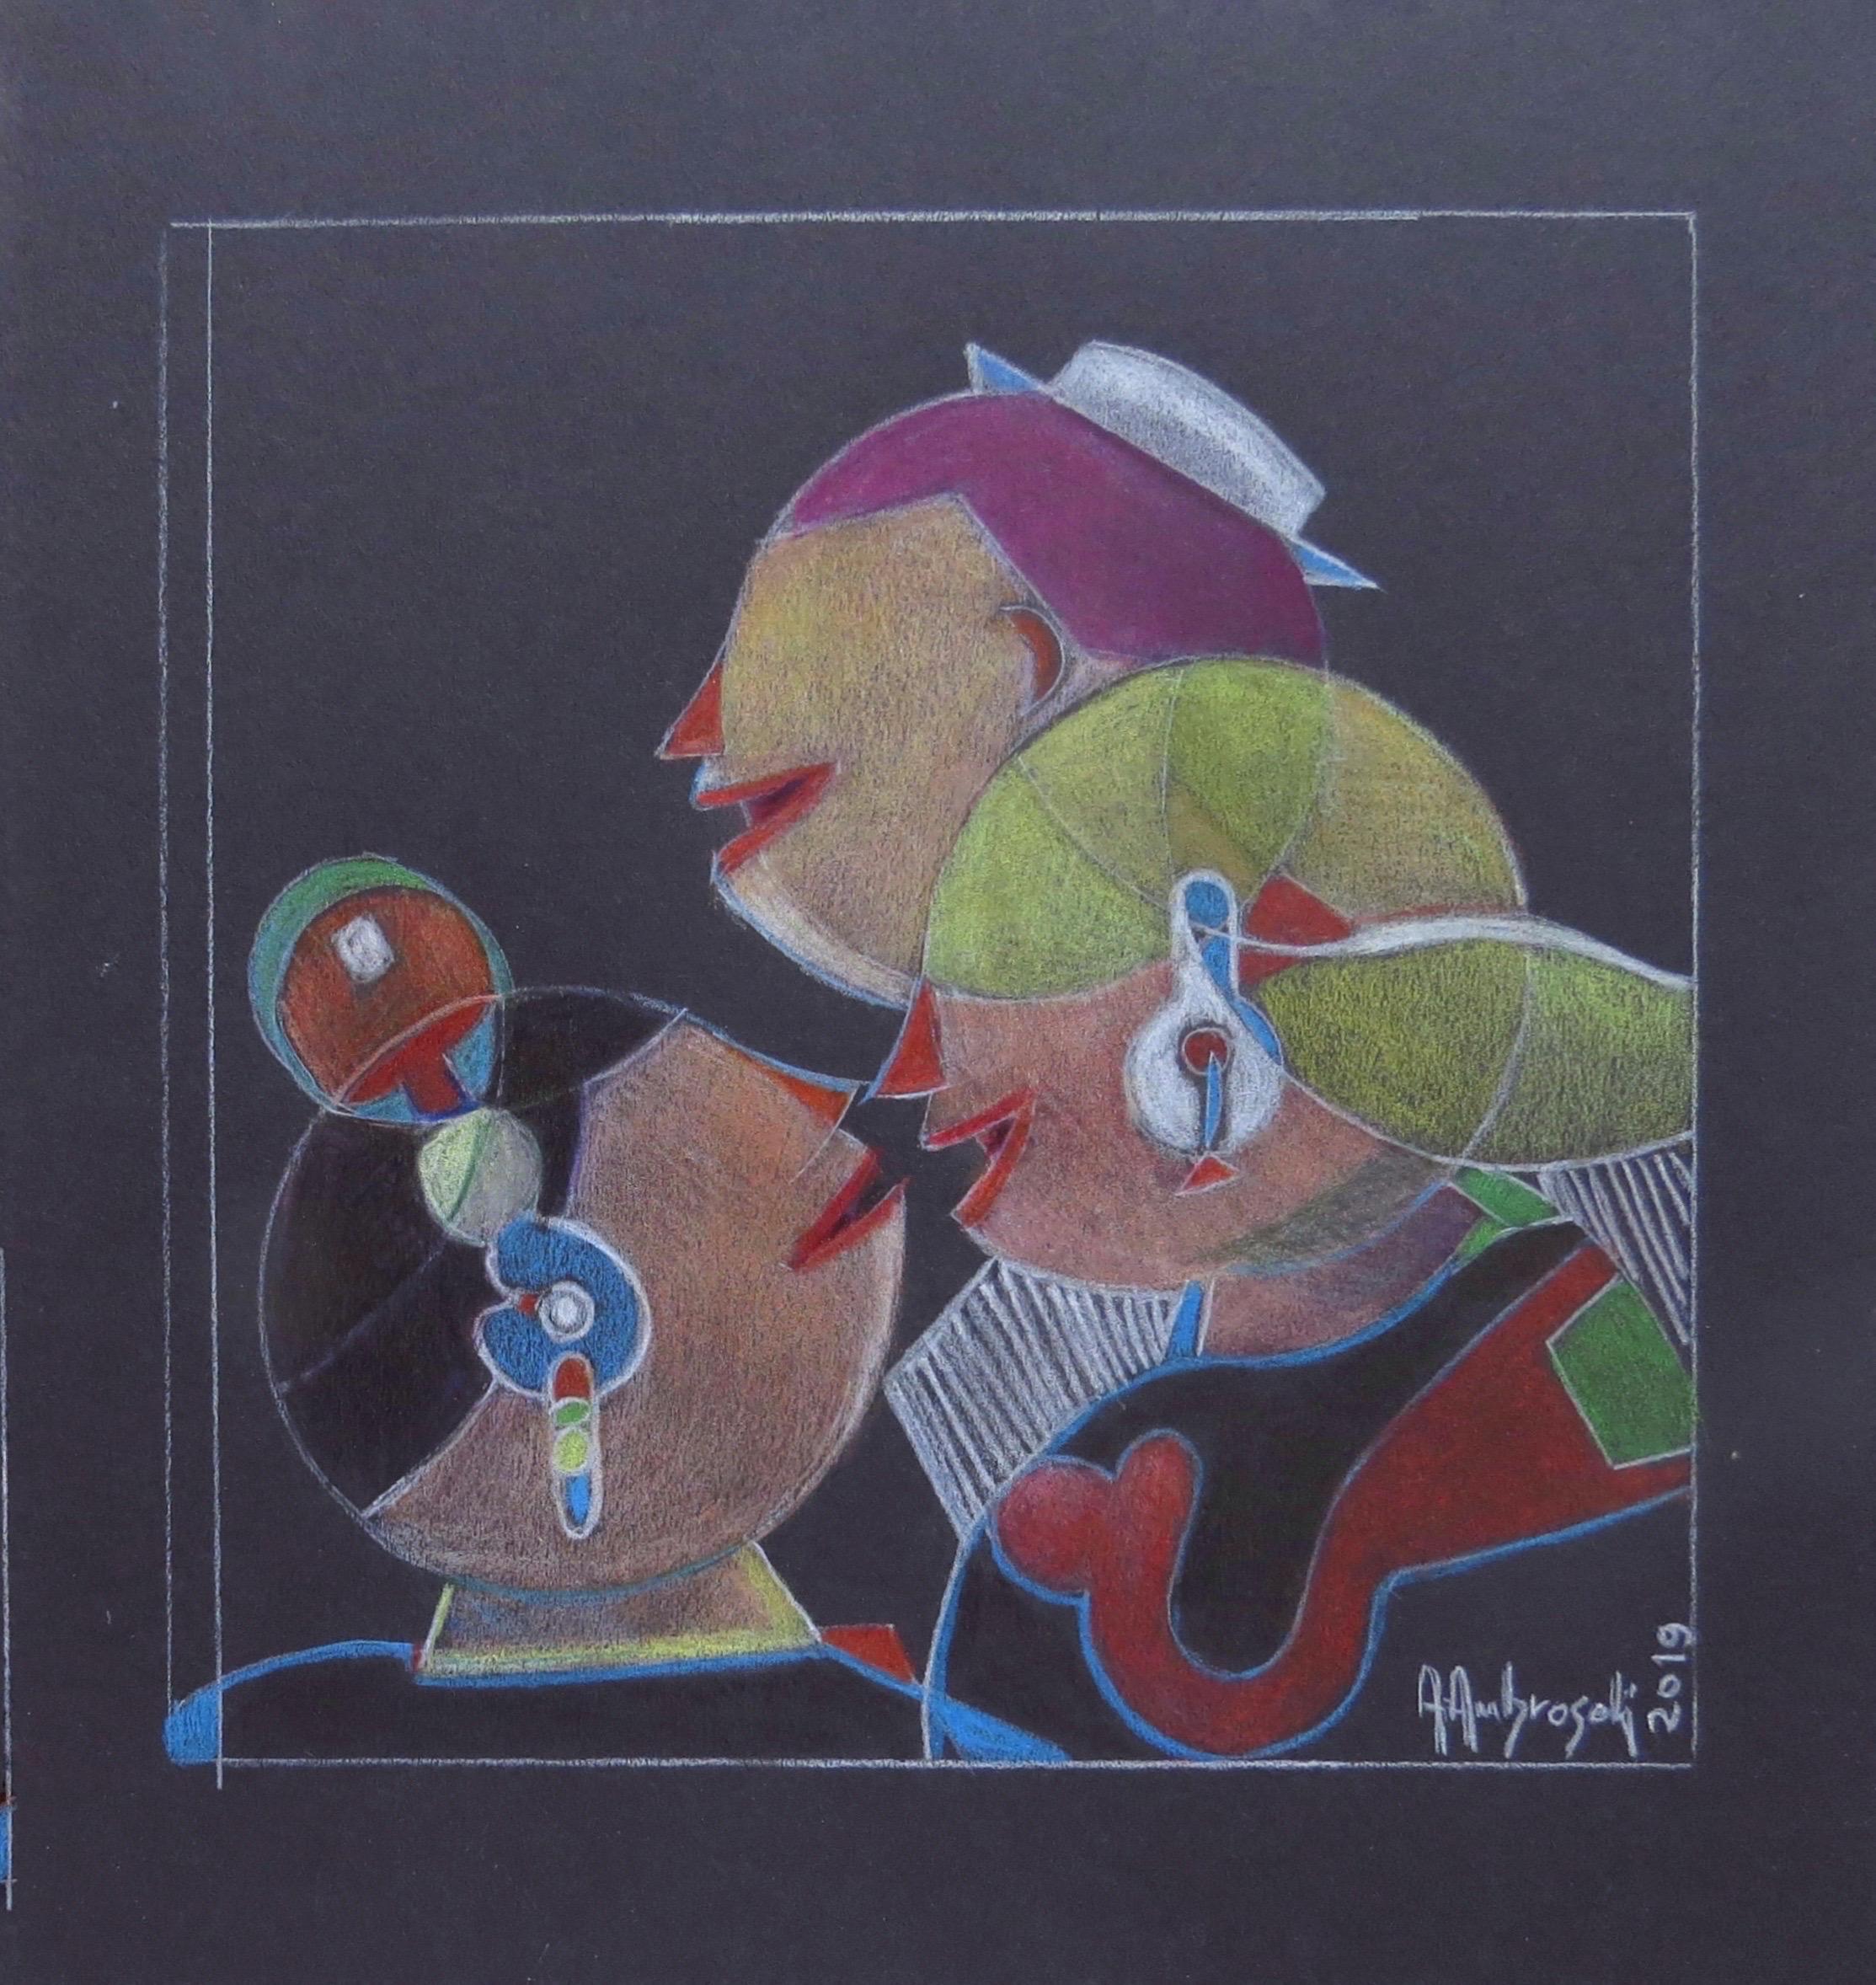 Love is in the Air (2019) cm 21x21,5, by Italian artist Annemarie Ambrosoli, is a colored drawing with color pencil on a black cardboard, that measures 29x27 cm.
This work is a one-of-a-kind piece. It is unframed. Hand-signed by the artist in the